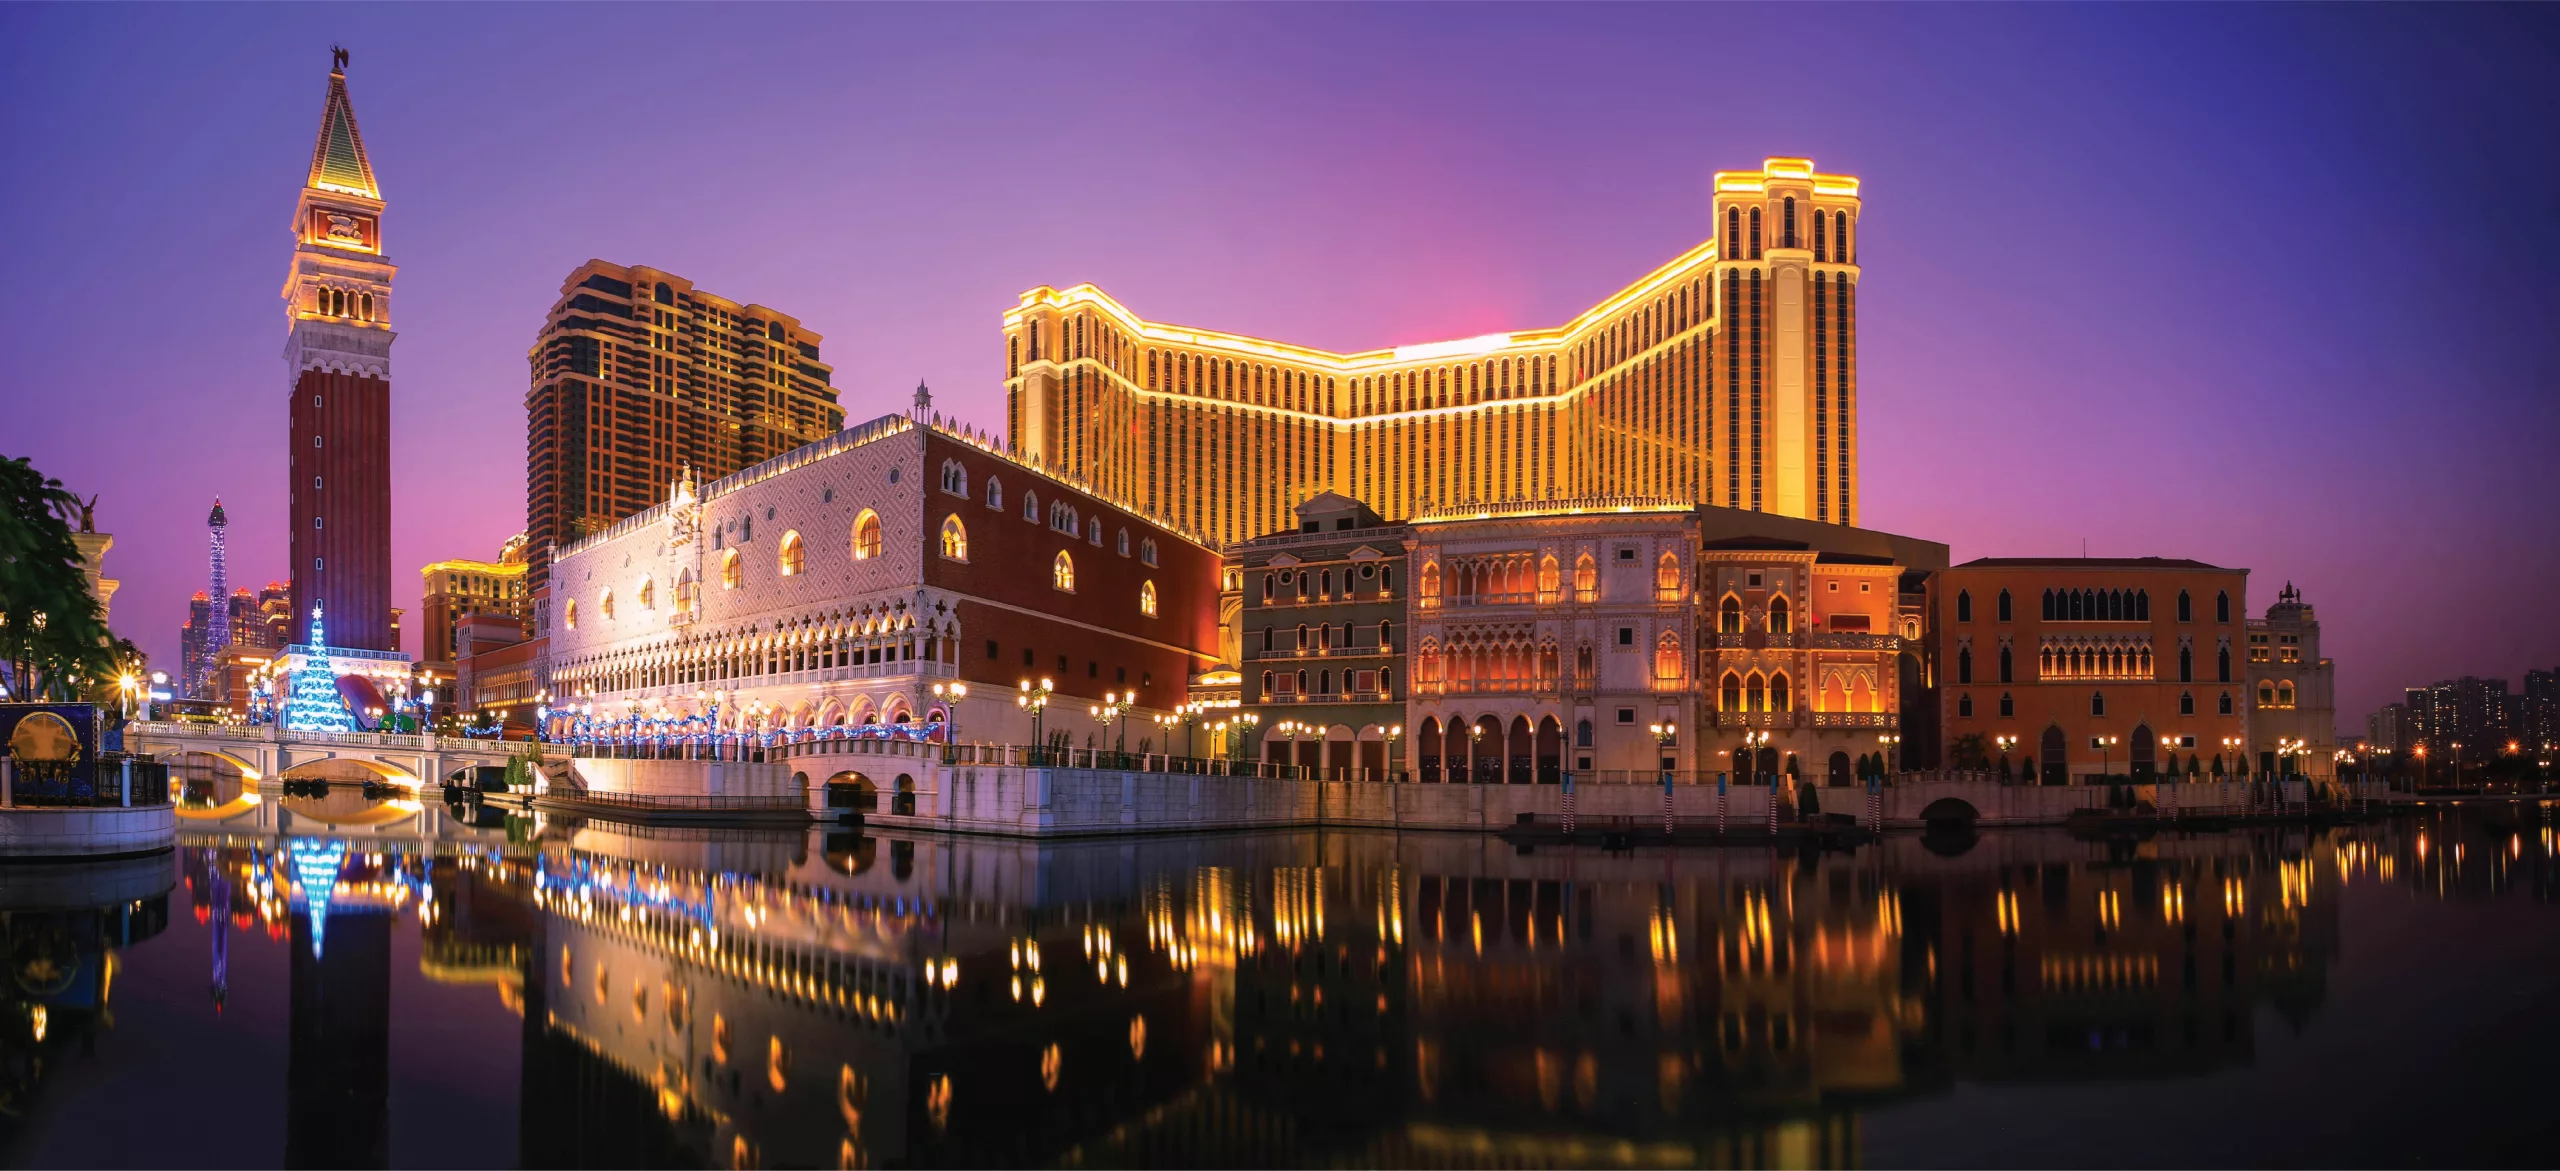 3 Best Casinos in Macau for Ultimate Fun, Frolic and Entertainment